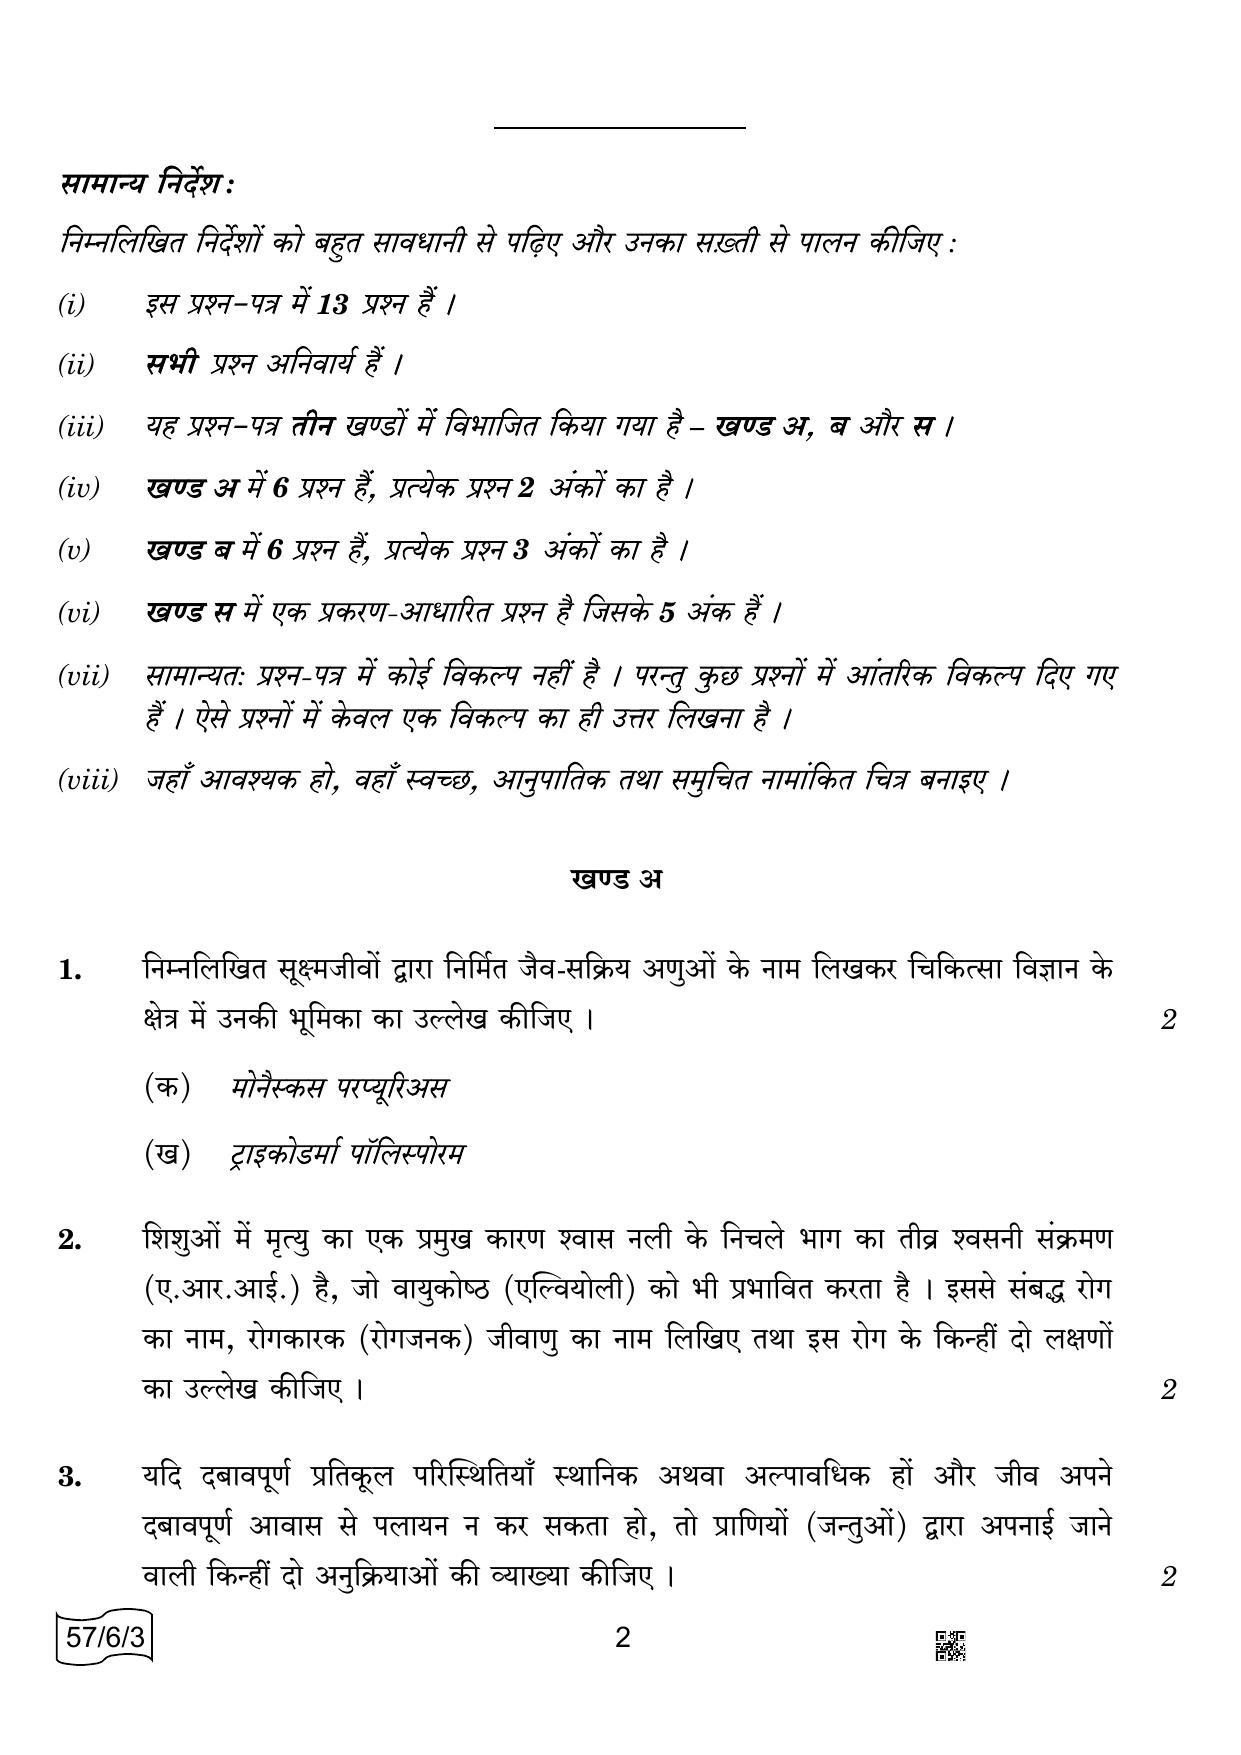 CBSE Class 12 57-6-3 BIOLOGY 2022 Compartment Question Paper - Page 2